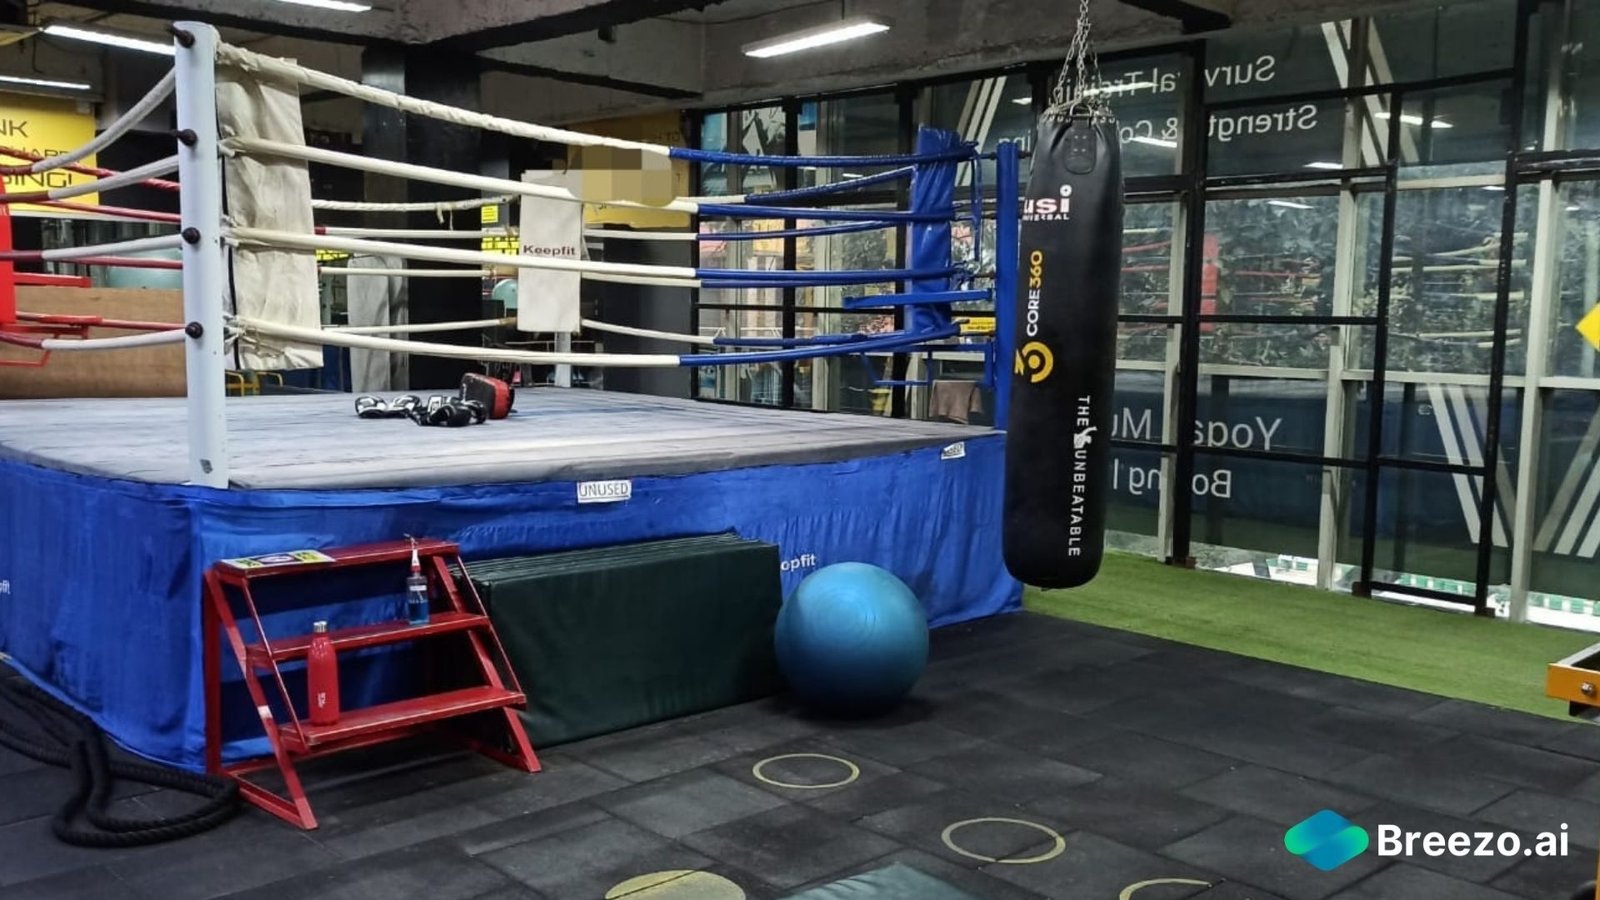 A dynamic ad film shoot location in Delhi NCR, Gurgaon, and Noida, featuring martial arts and a professional boxing ring.